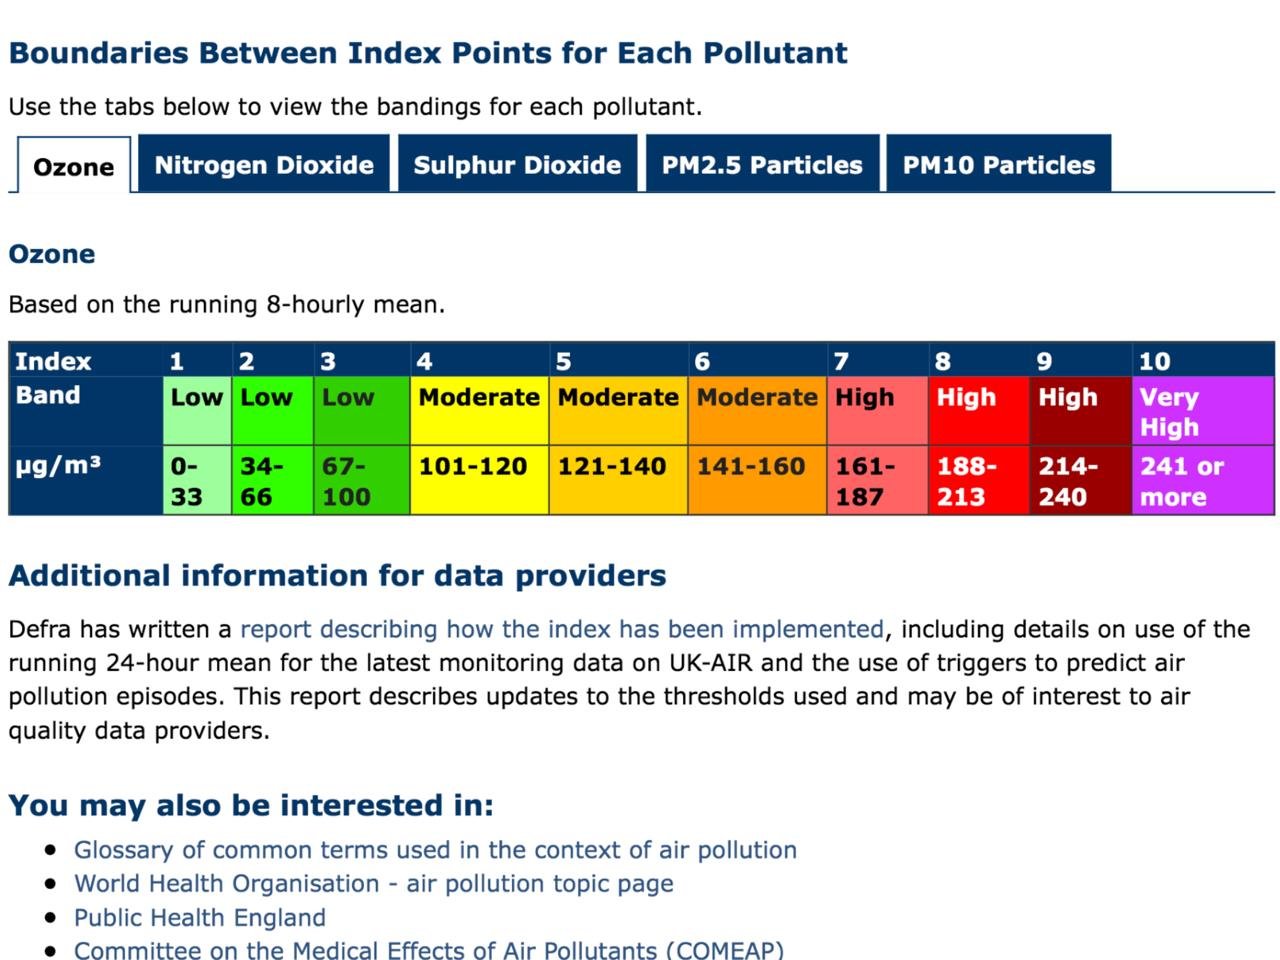 Exhibit 4 Defra Daily Air Quality Index bands